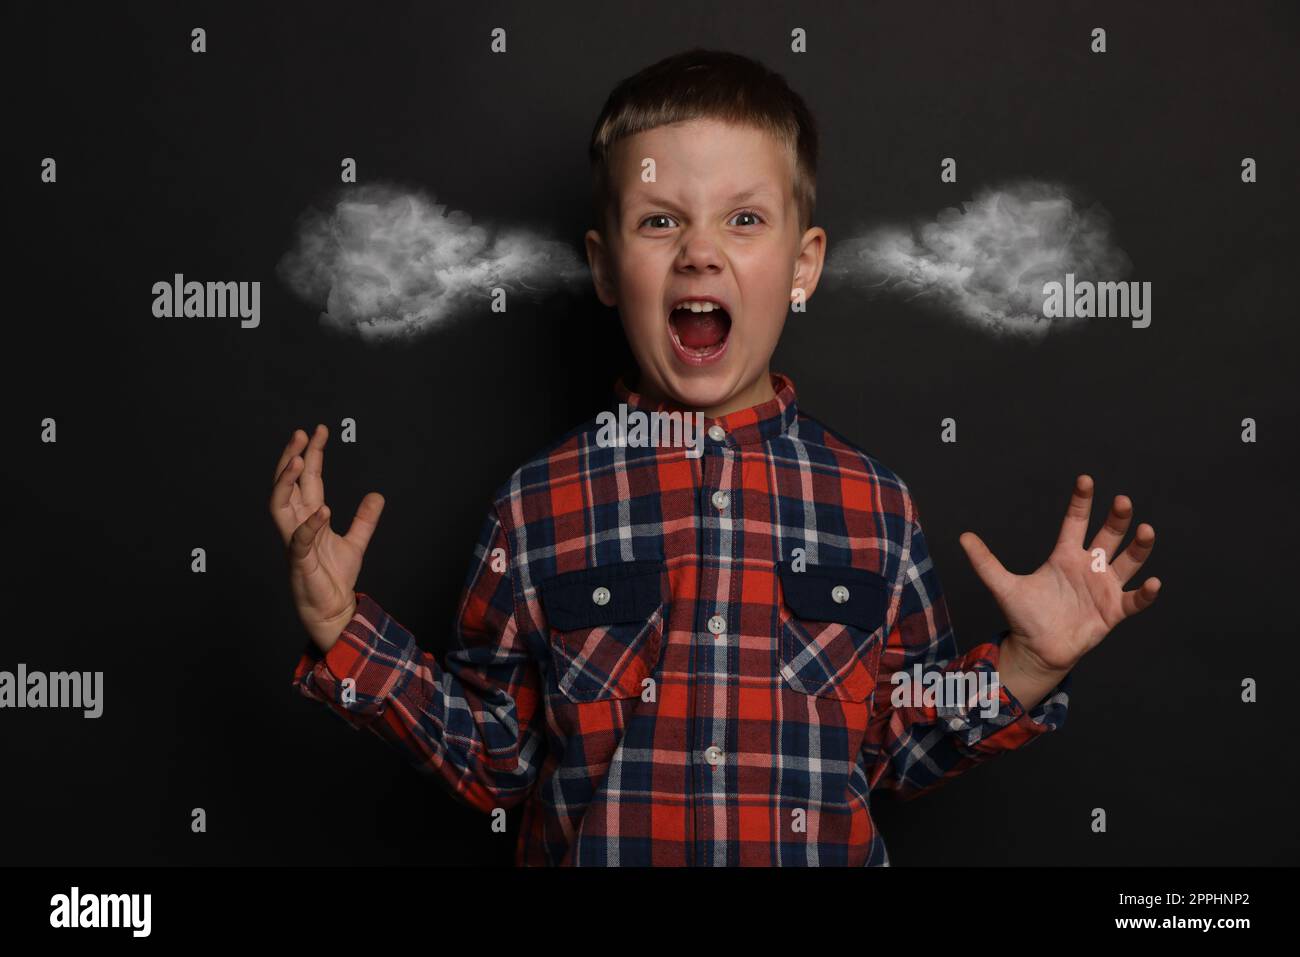 Aggressive little boy with steam coming out of his ears on black background Stock Photo